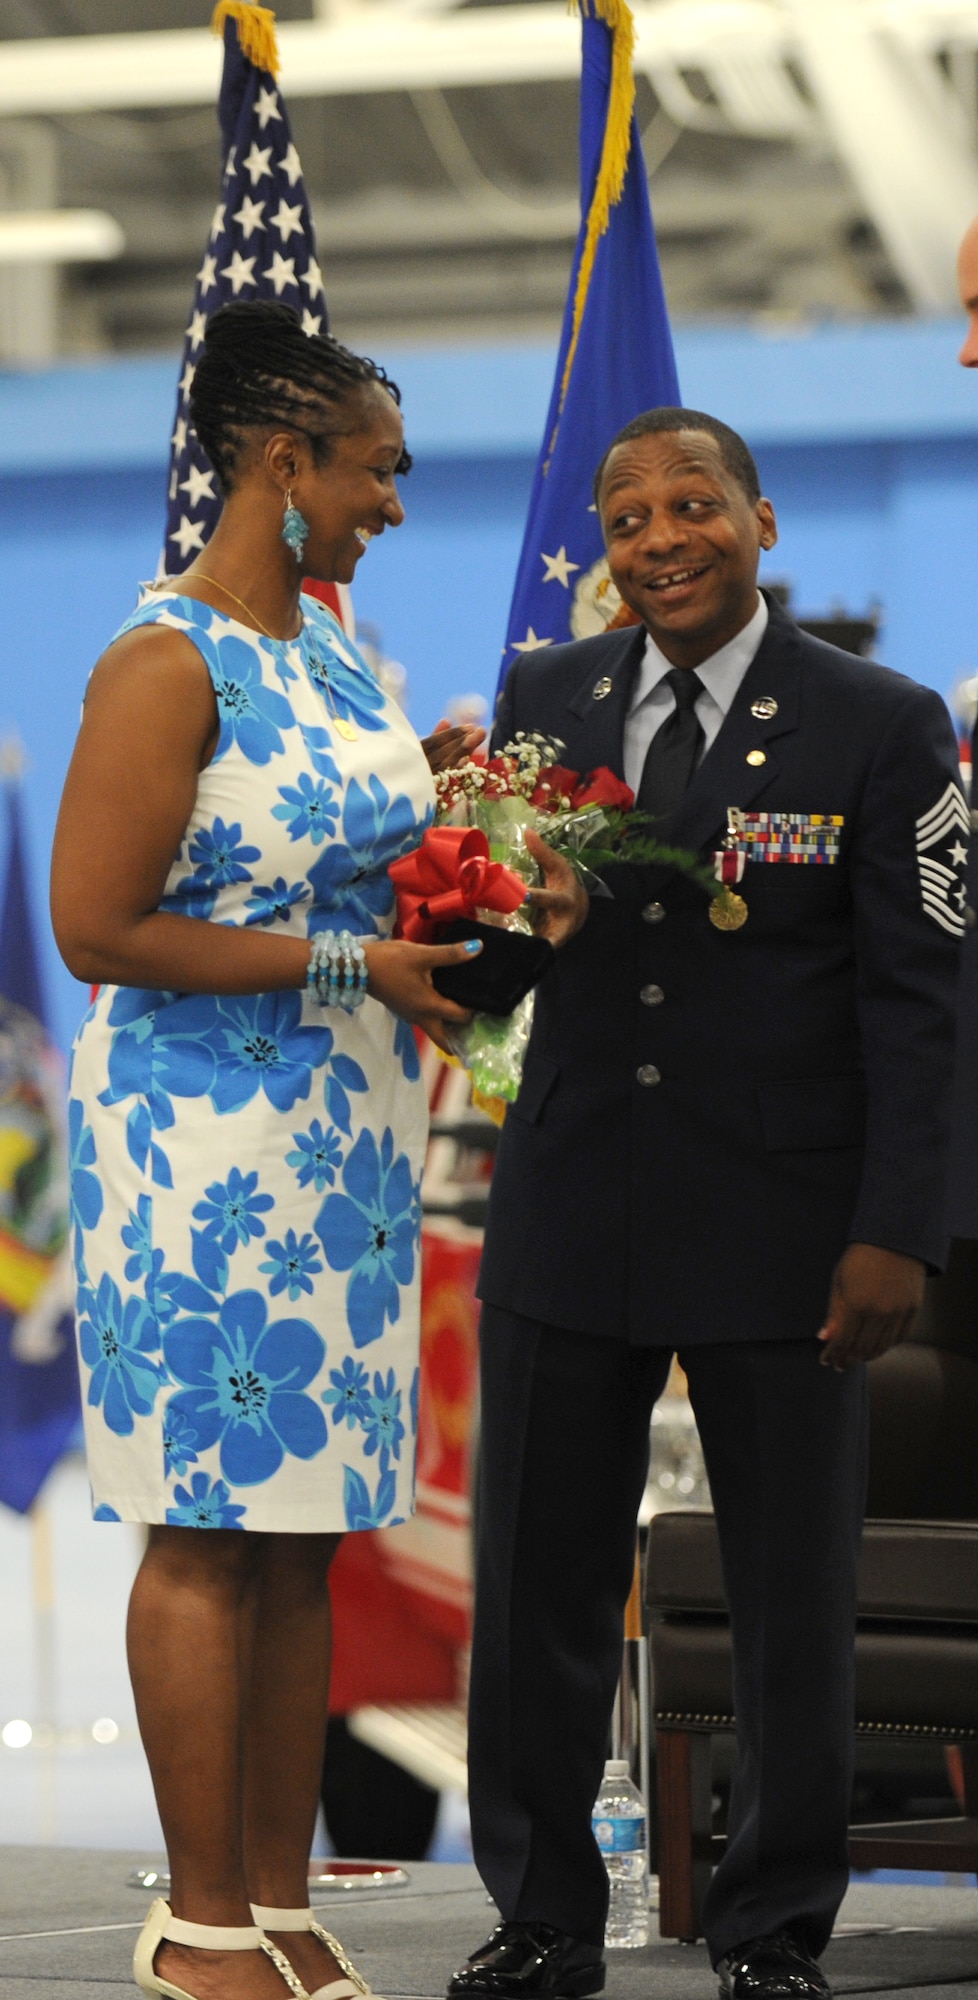 Chief Master Sgt. Anthony Brinkley, 11th Wing/Joint Base Andrews command chief, presents his wife with a bouquet of flowers during his retirement ceremony June 8, 2012. Brinkley served more than 28 years in the Air Force.  (U.S. Air Force Photo by Staff Sgt. Torey Griffith)